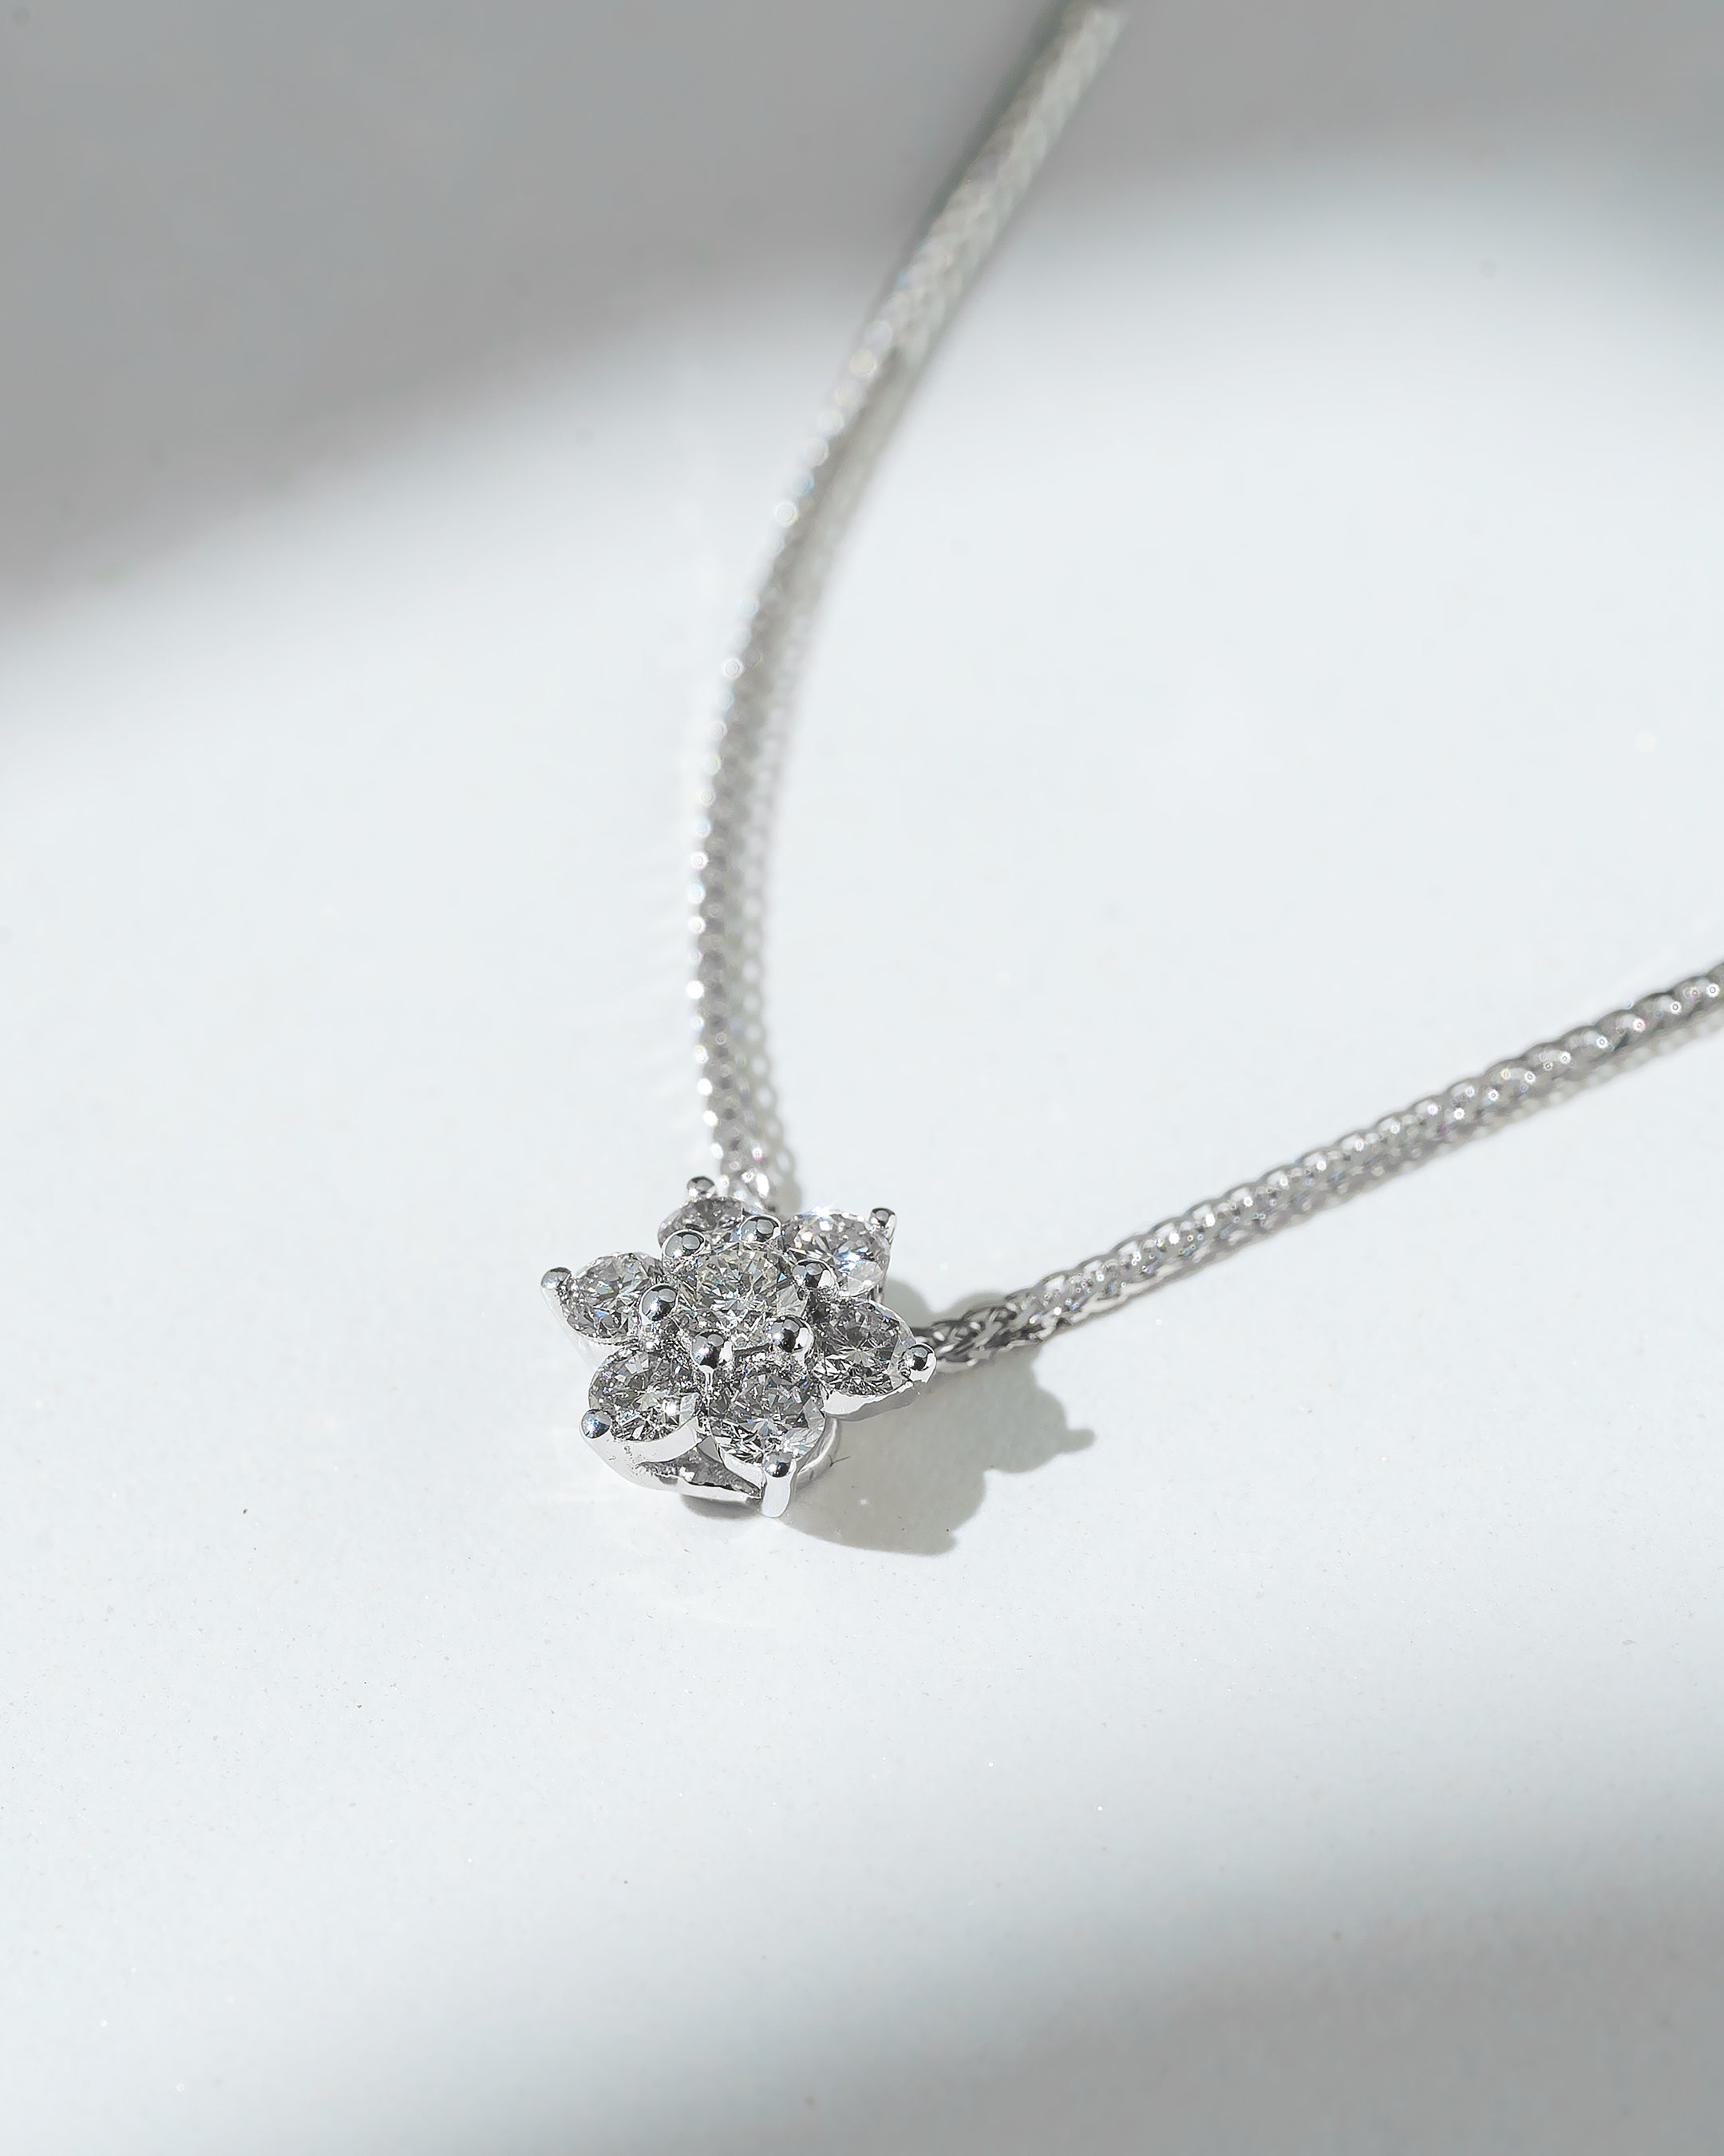 Snowflake Necklace Dainty Necklace for Hervalentine's - Etsy UK in 2023 |  Girlfriend gifts, Christmas gifts for women, Dainty necklace